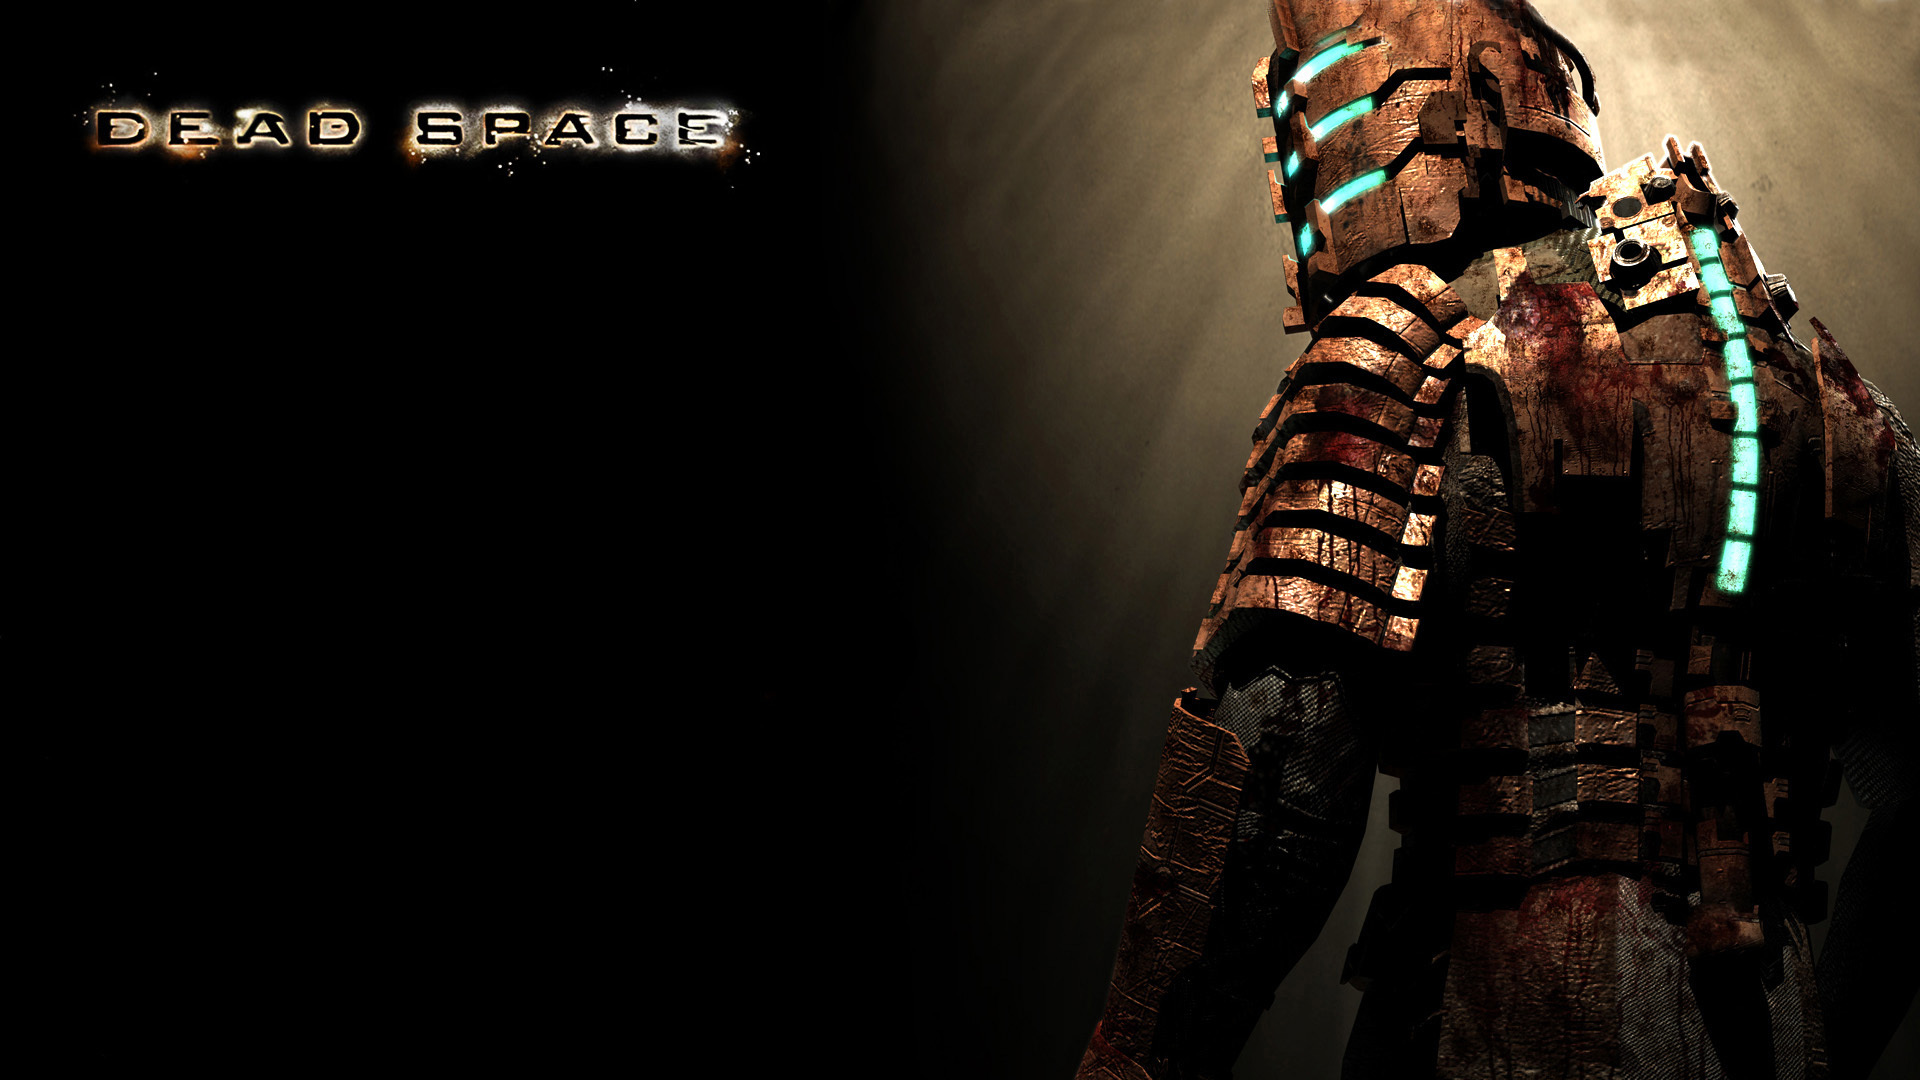 Wallpaper Dead Space 2 1 PC Android iPhone and iPad Wallpapers